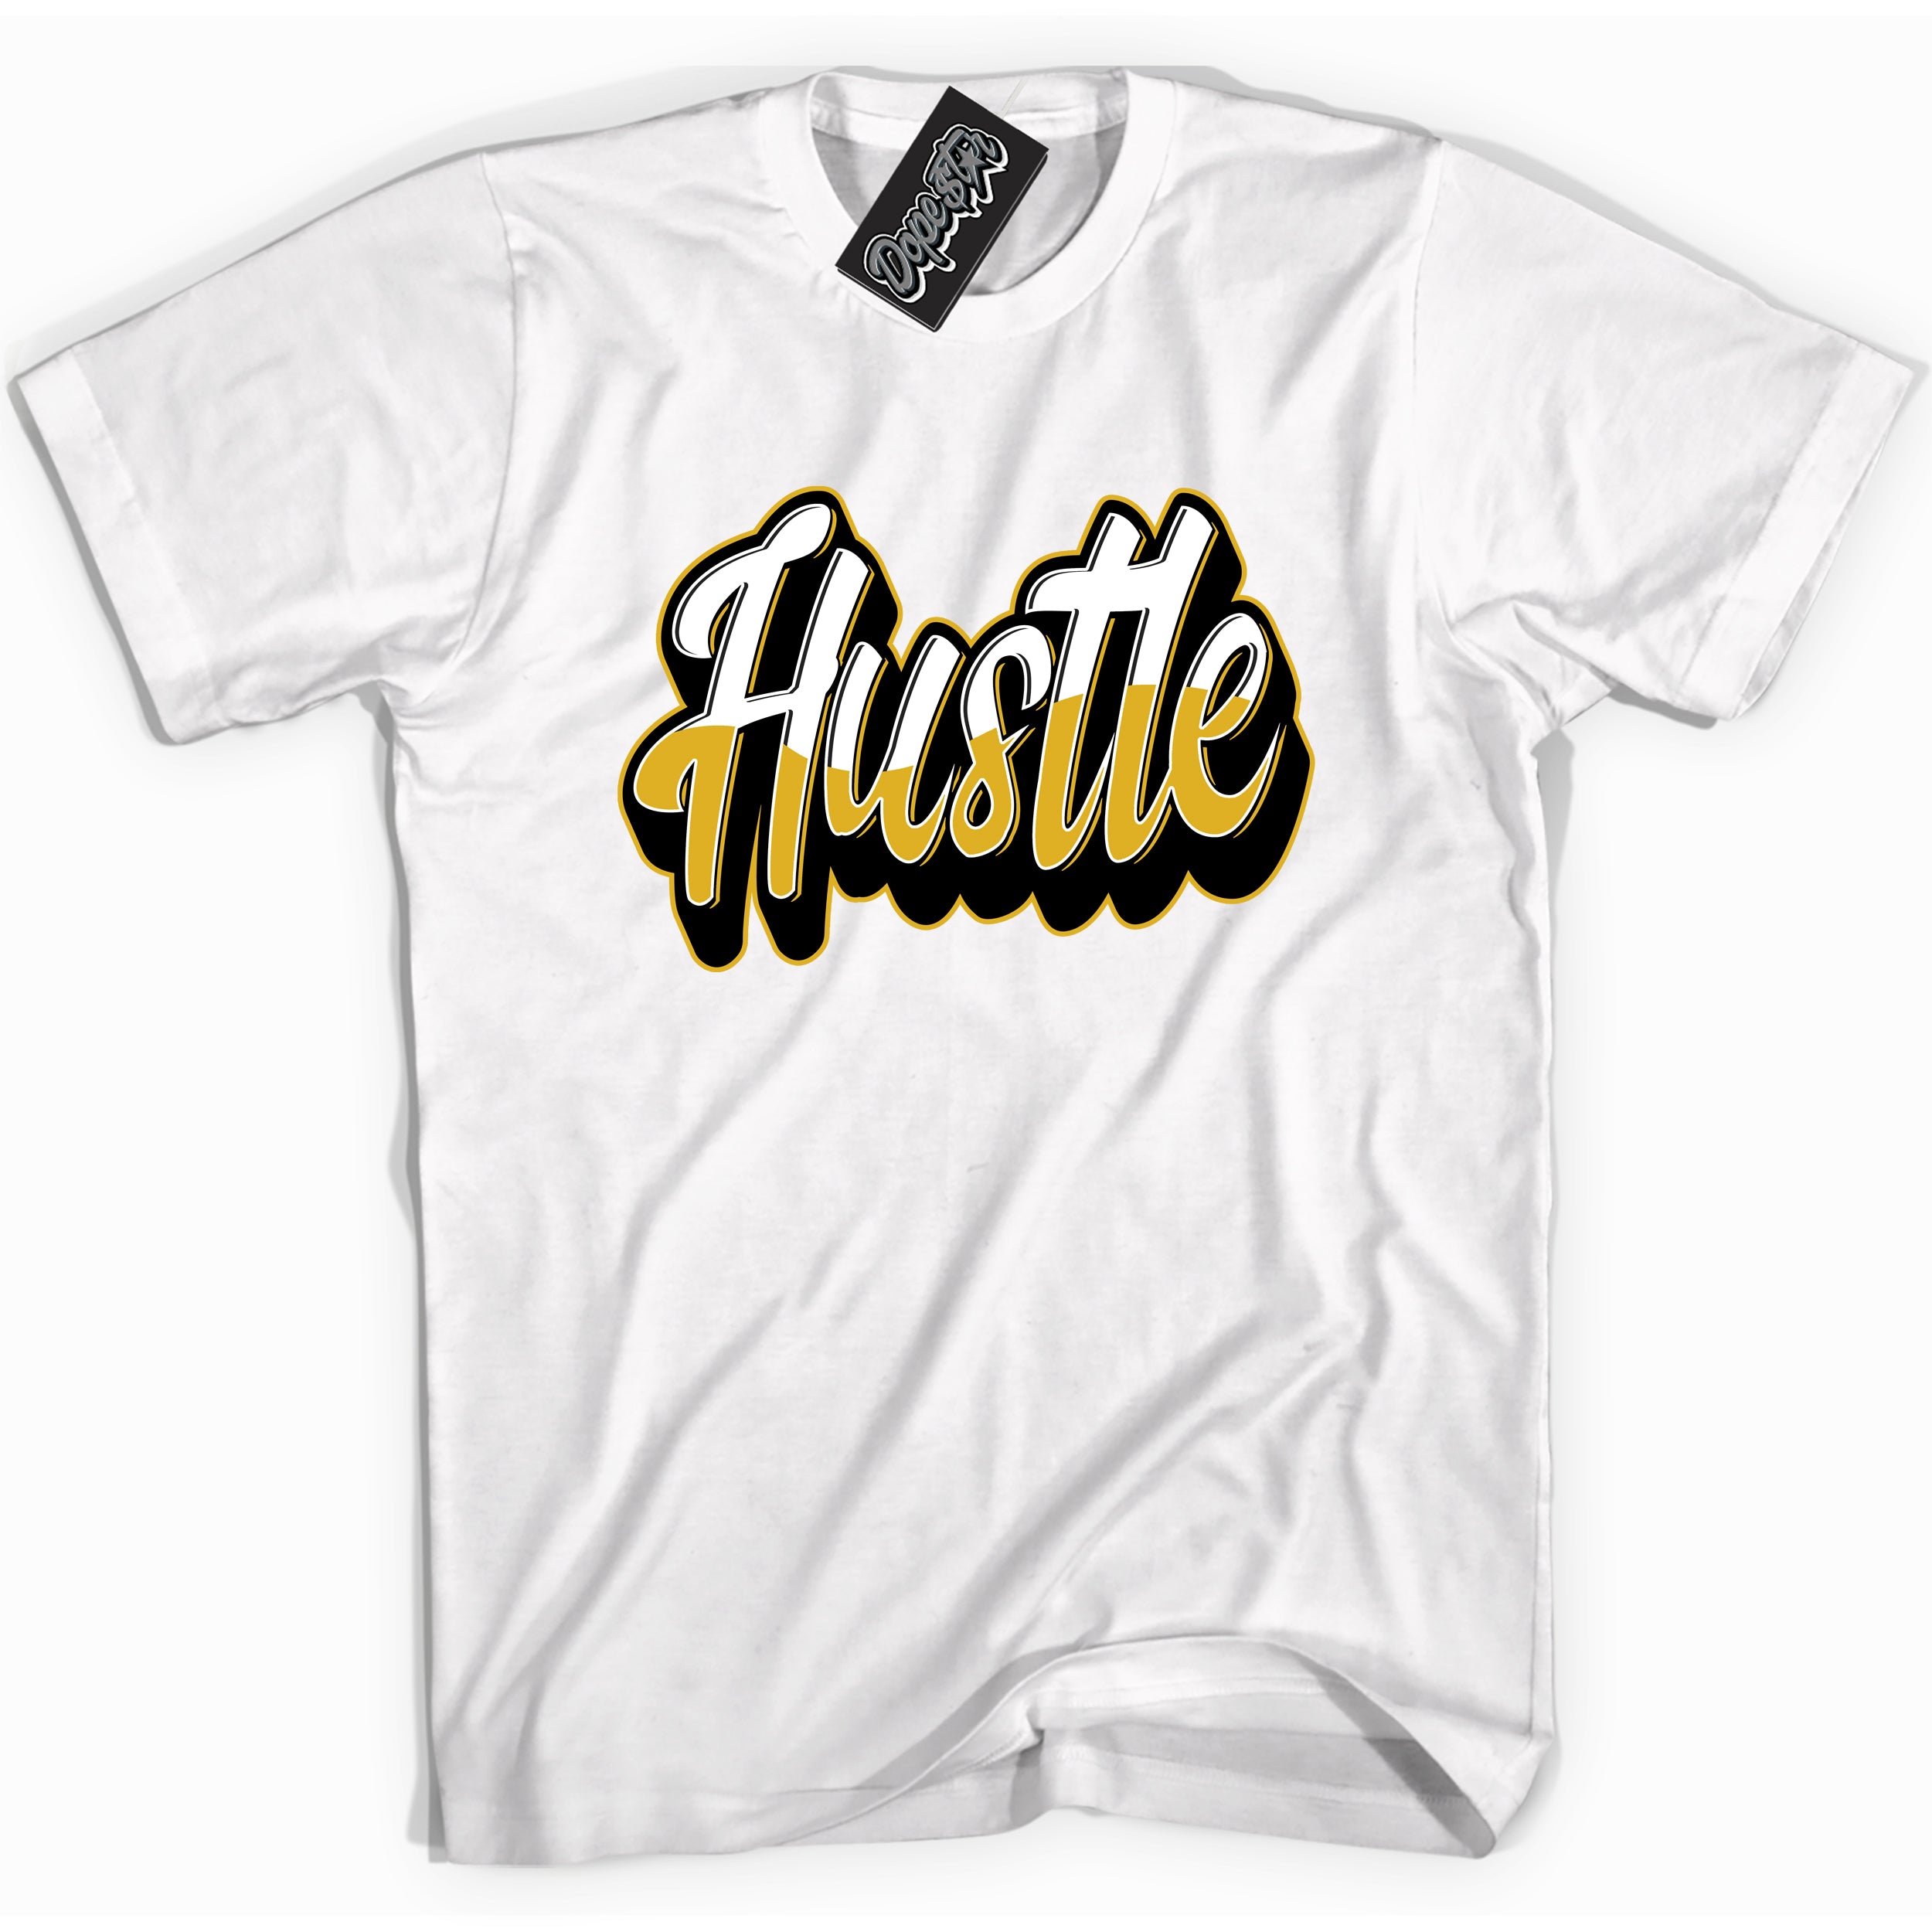 Cool White Shirt with “ Hustle” design that perfectly matches Yellow Ochre 6s Sneakers.